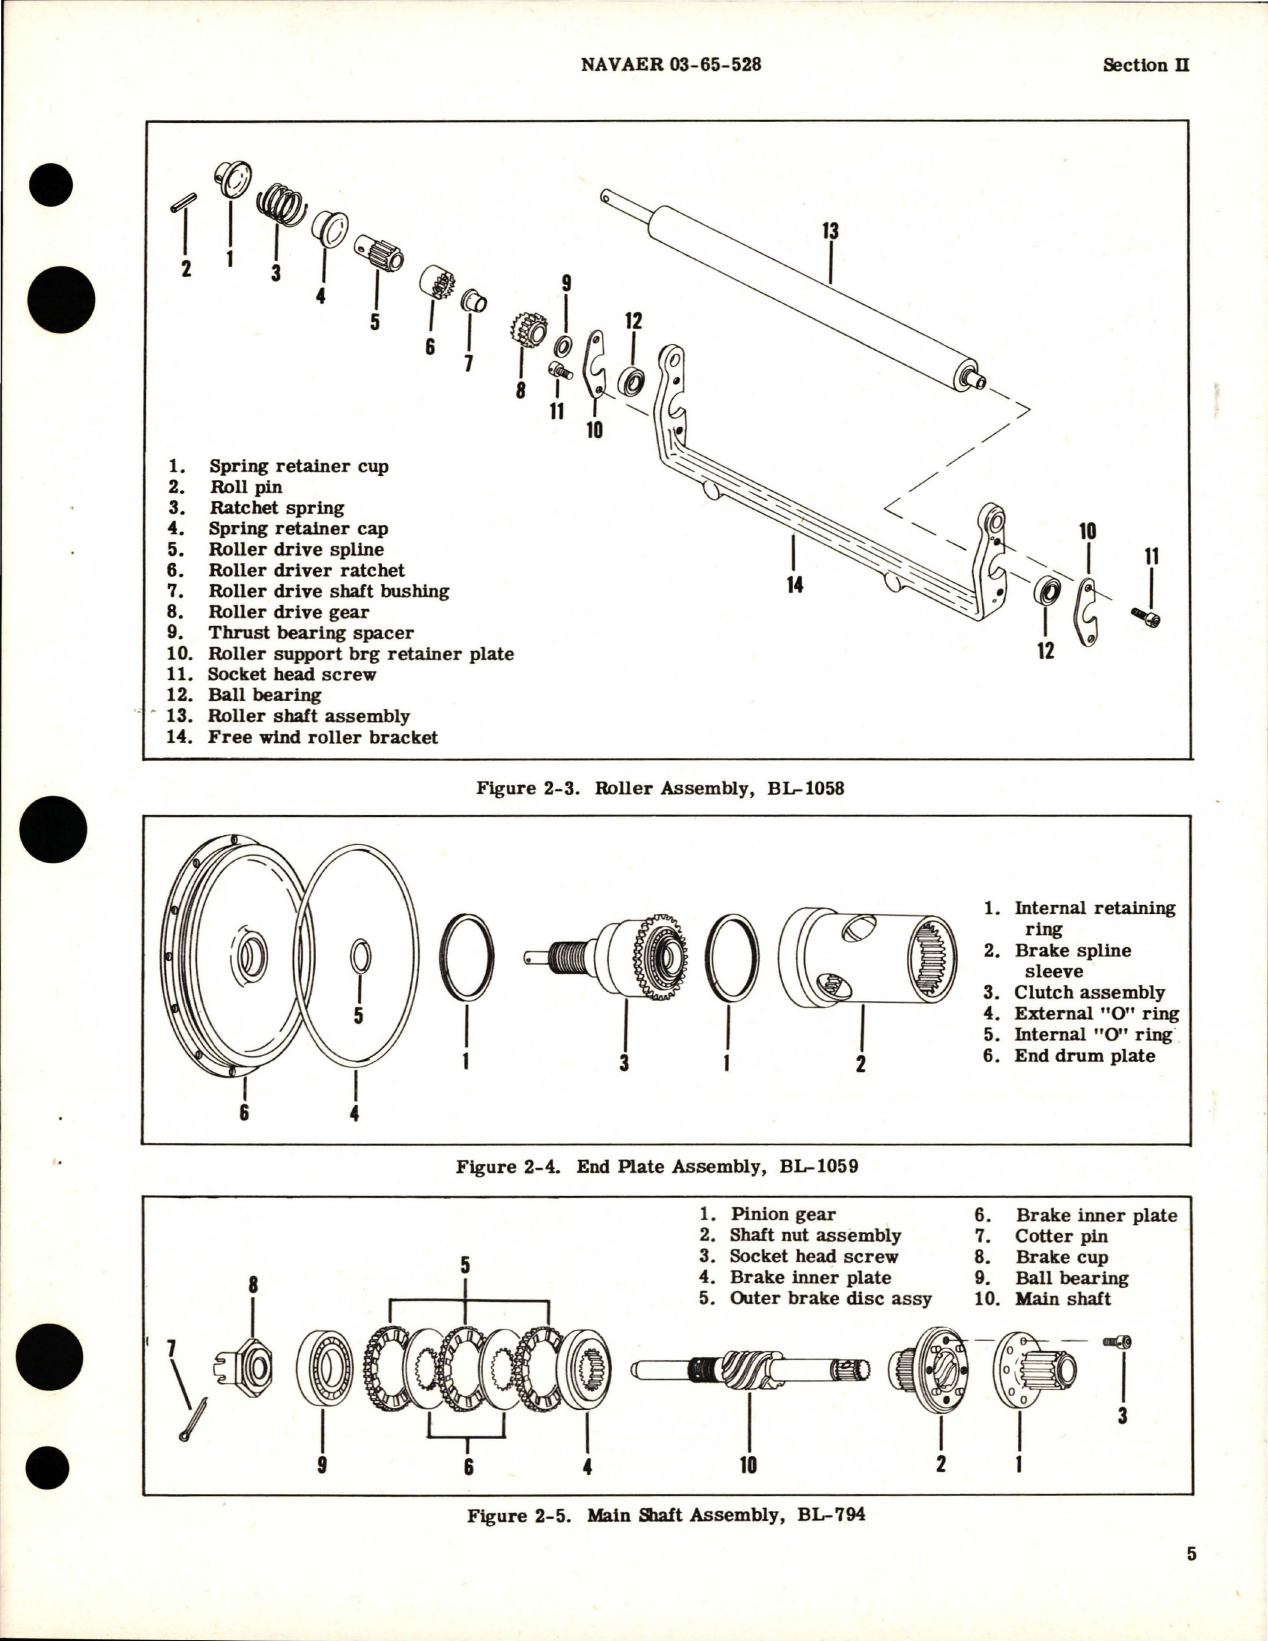 Sample page 7 from AirCorps Library document: Overhaul Instructions for Rescue Winch Assembly - Parts BL-413 and BL-413-1 